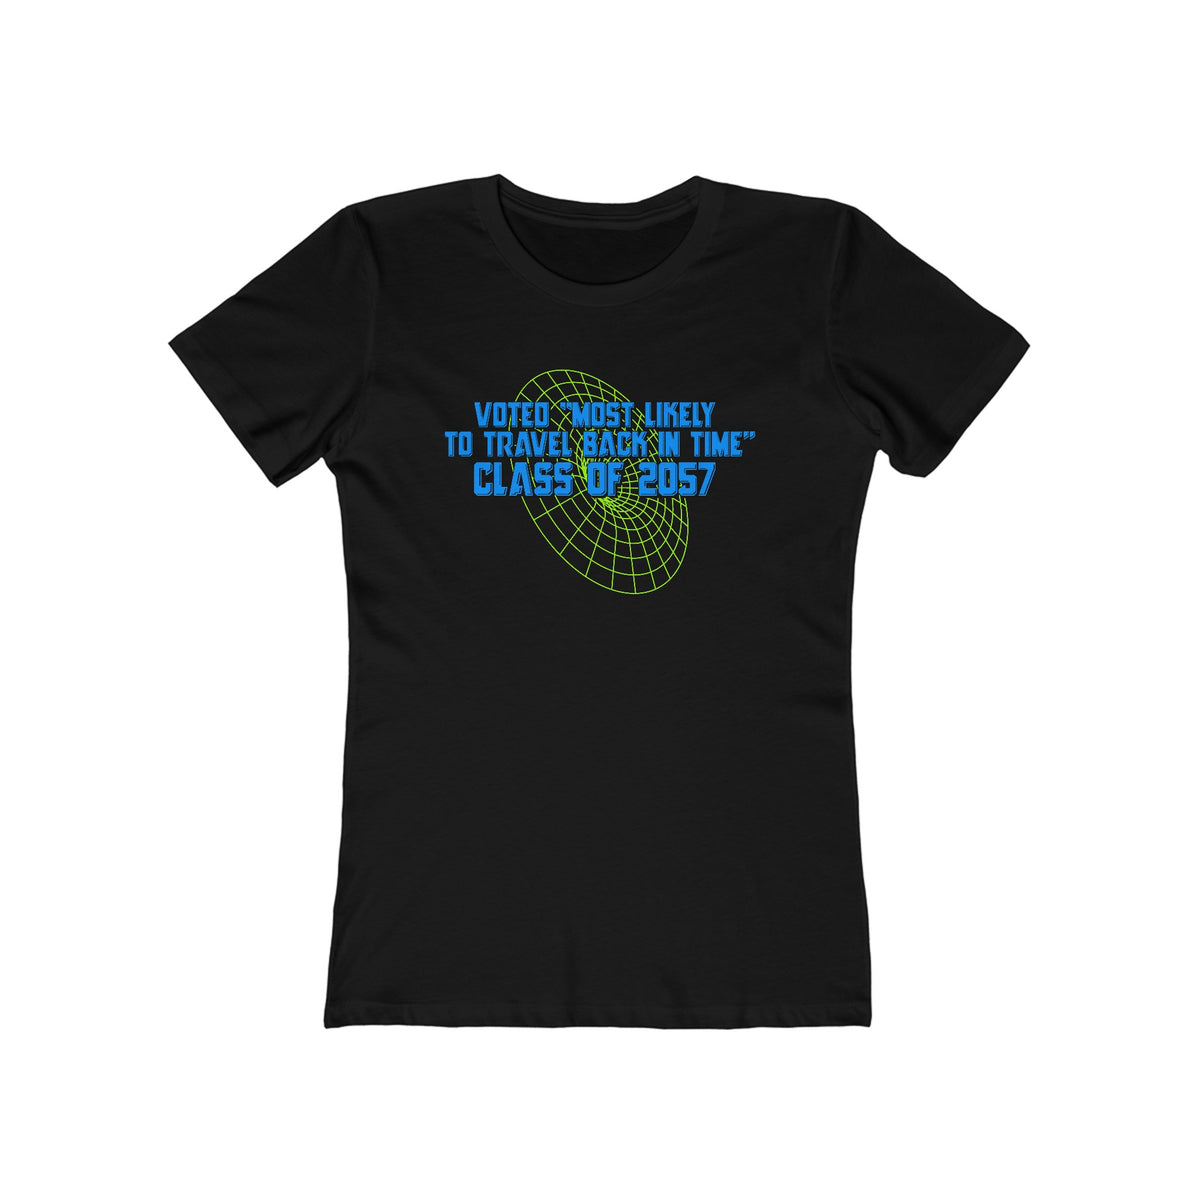 Voted "Most Likely To Travel Back In Time" - Women’s T-Shirt